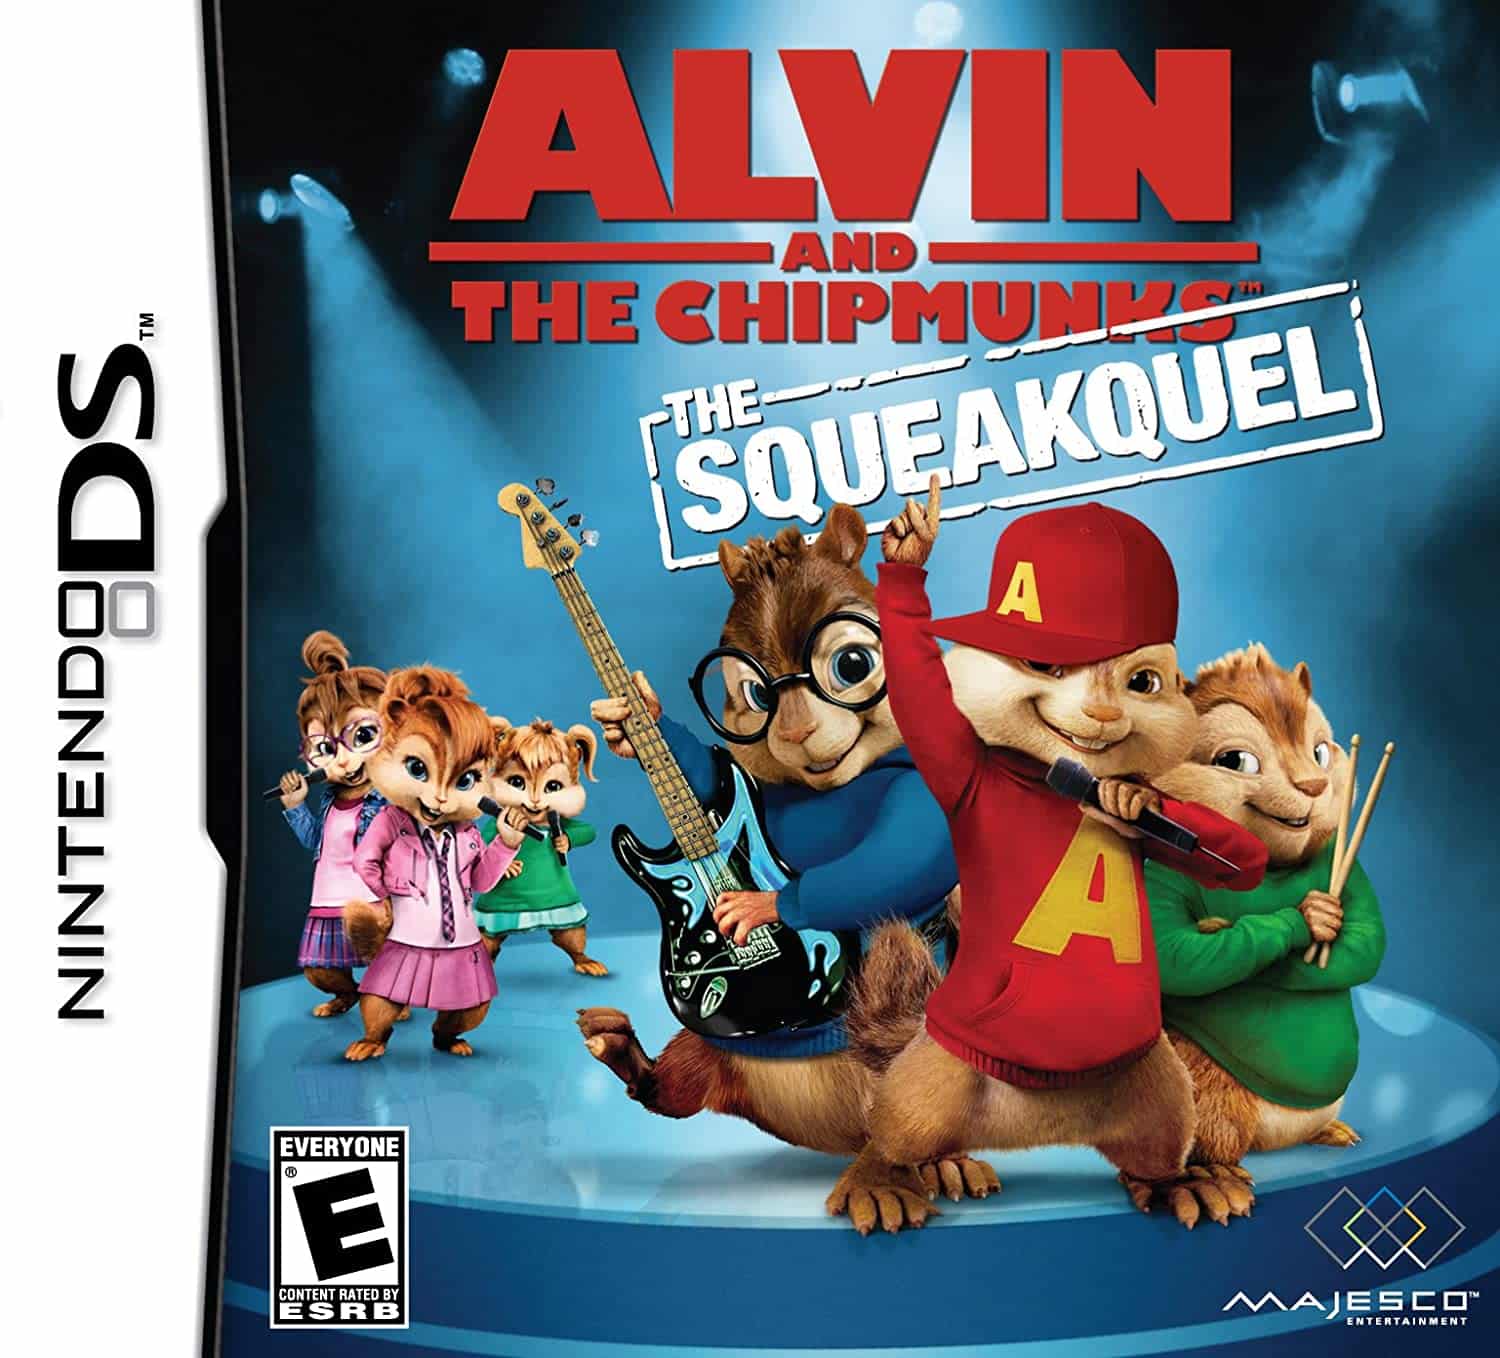 Alvin and the Chipmunks: The Squeakquel player count stats